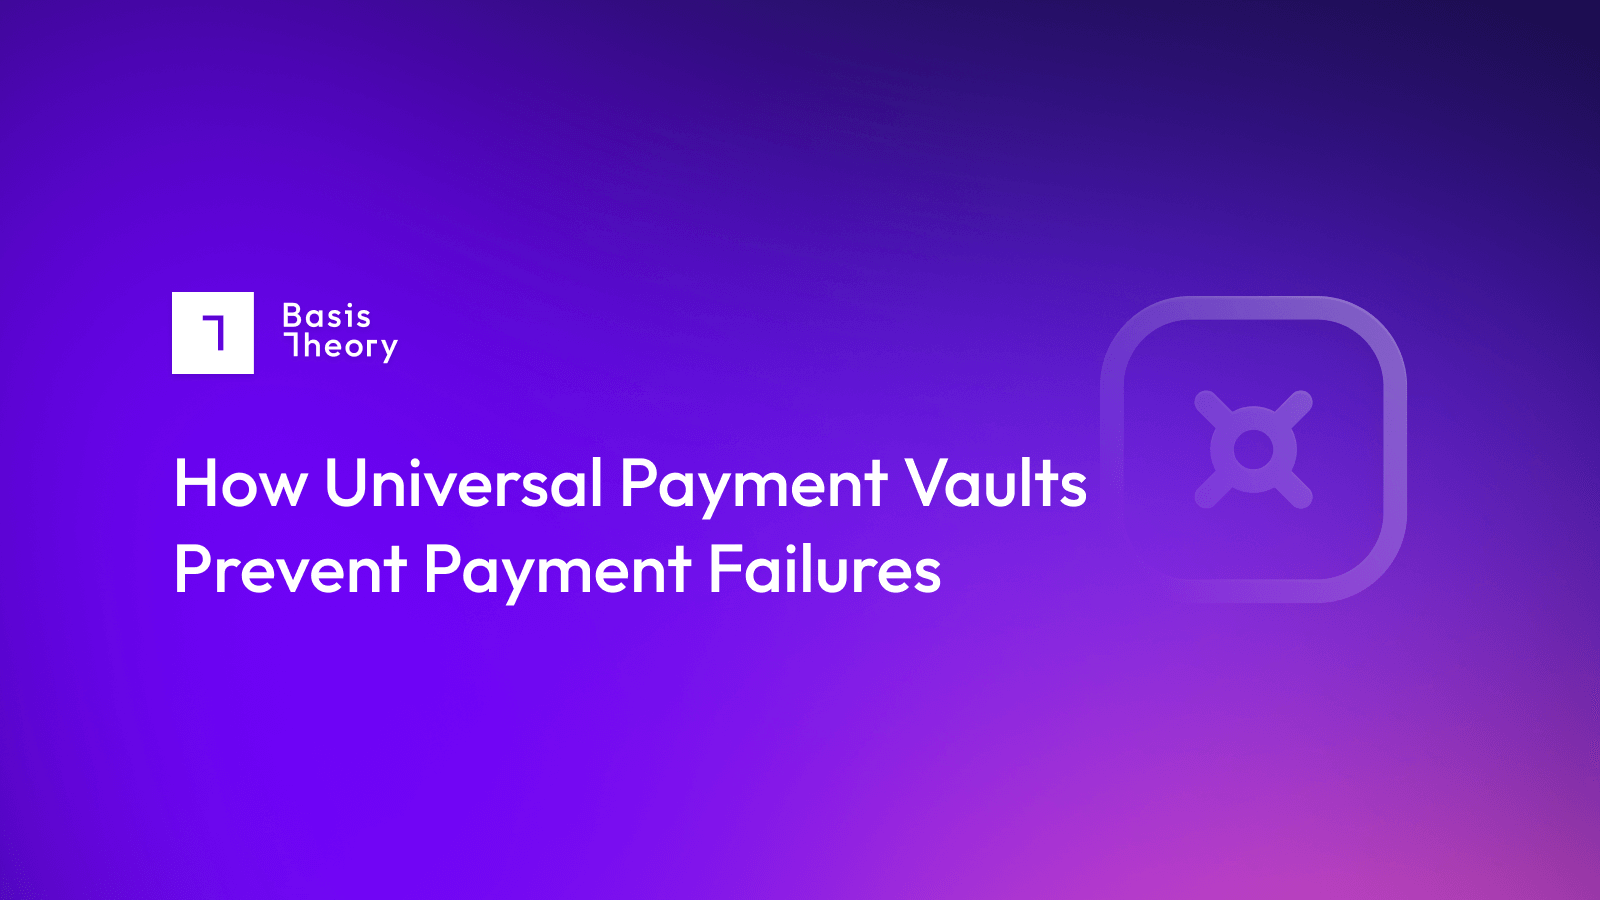 How universal payment vaults prevent payment failures